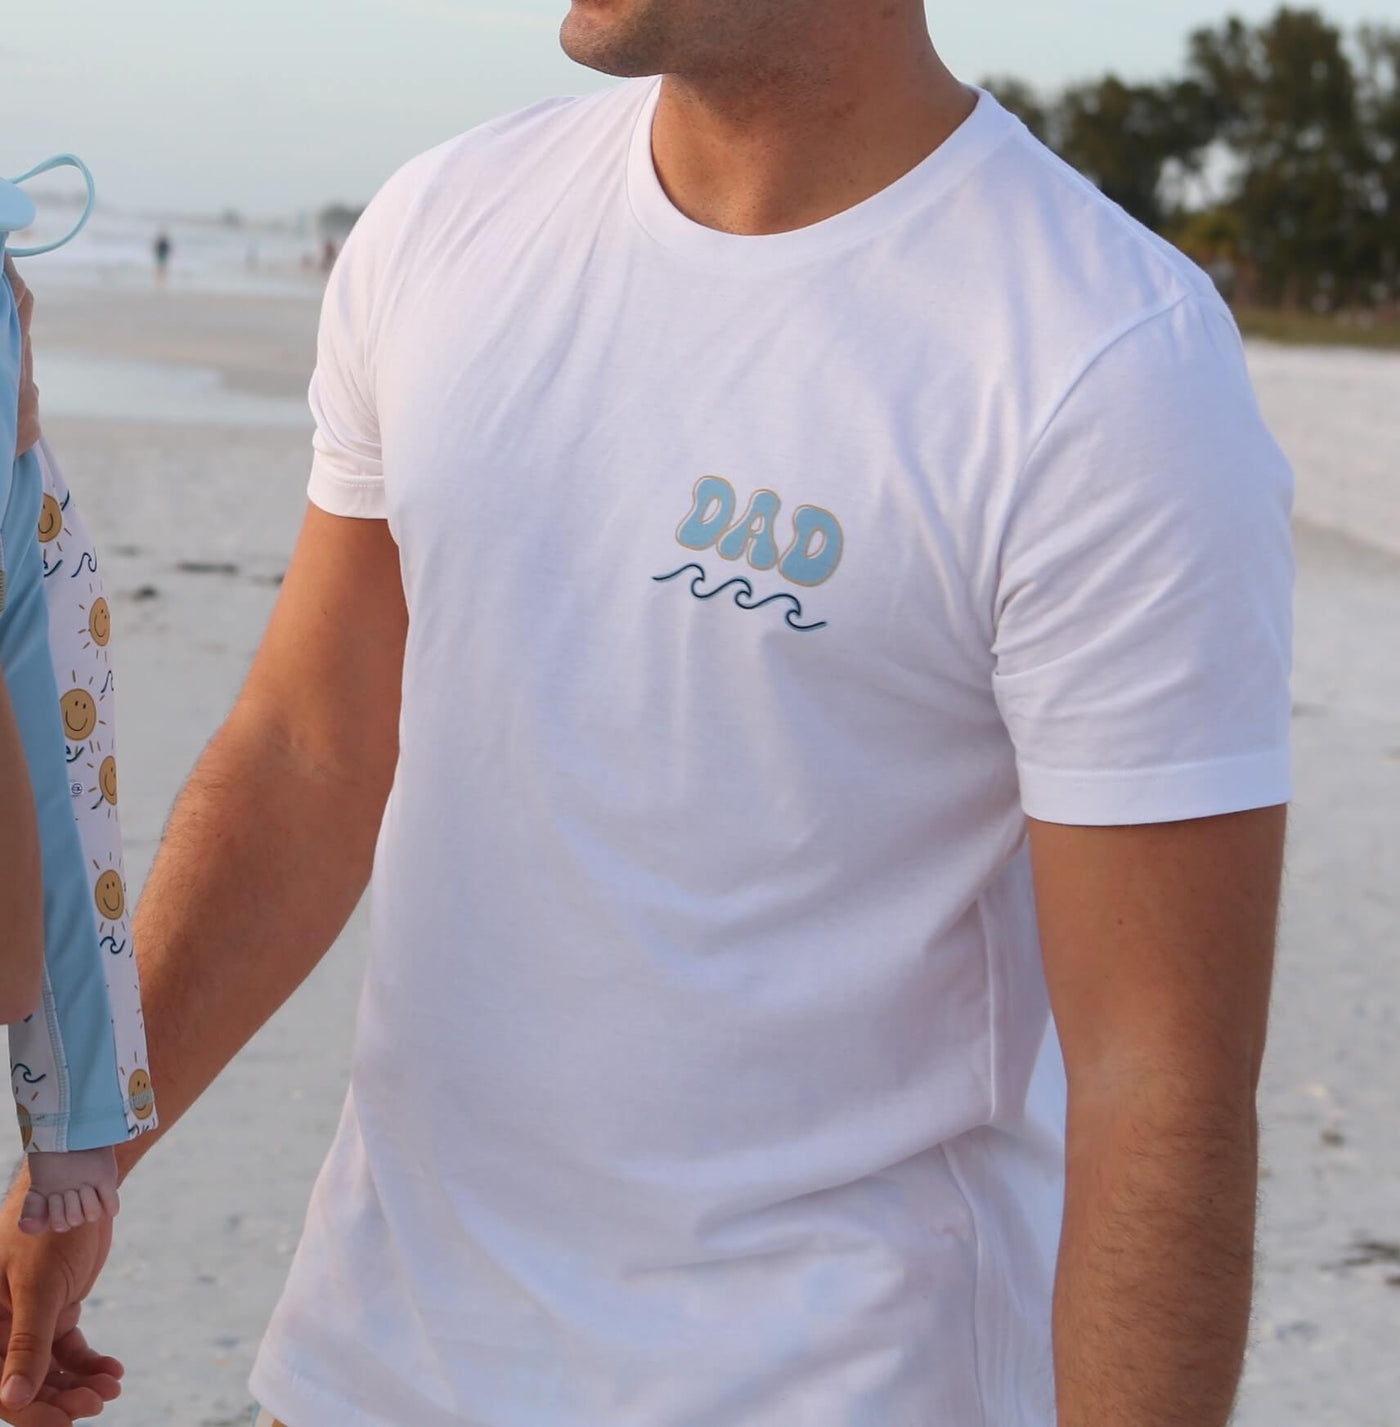 sun's out dad tee 